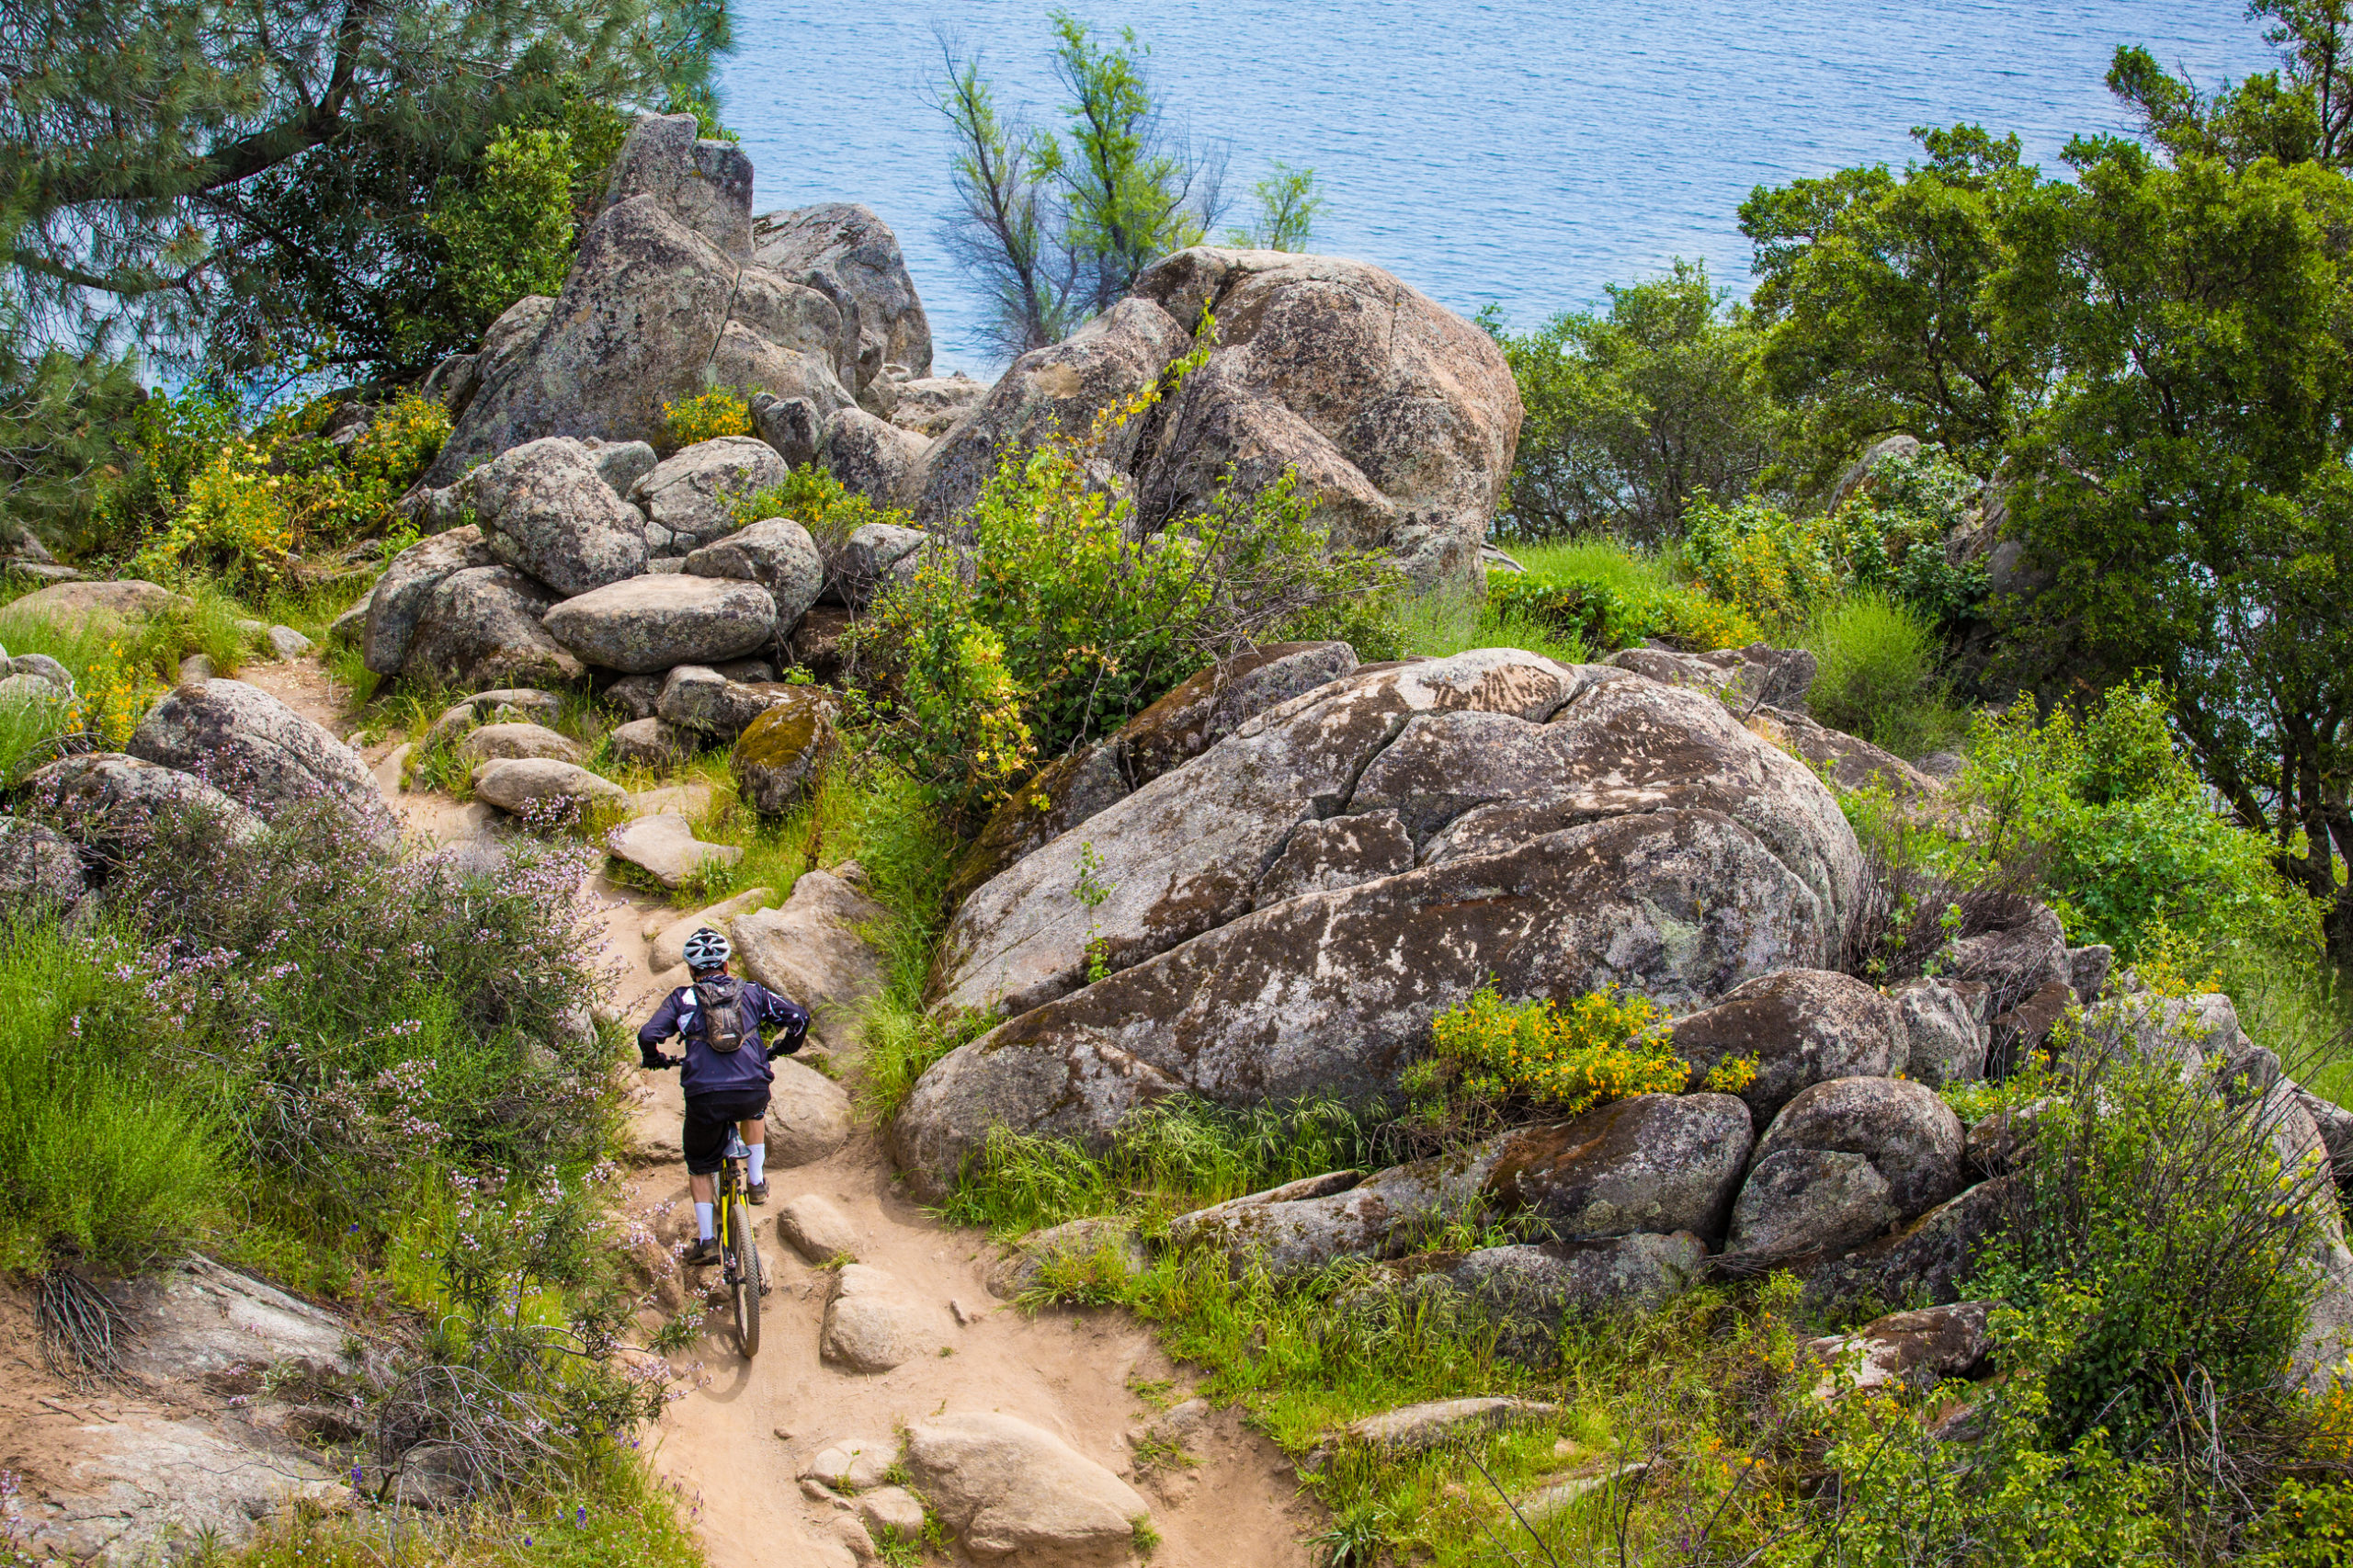 Hikes & Trails: Hiking Trails & Bike Paths in Placer County